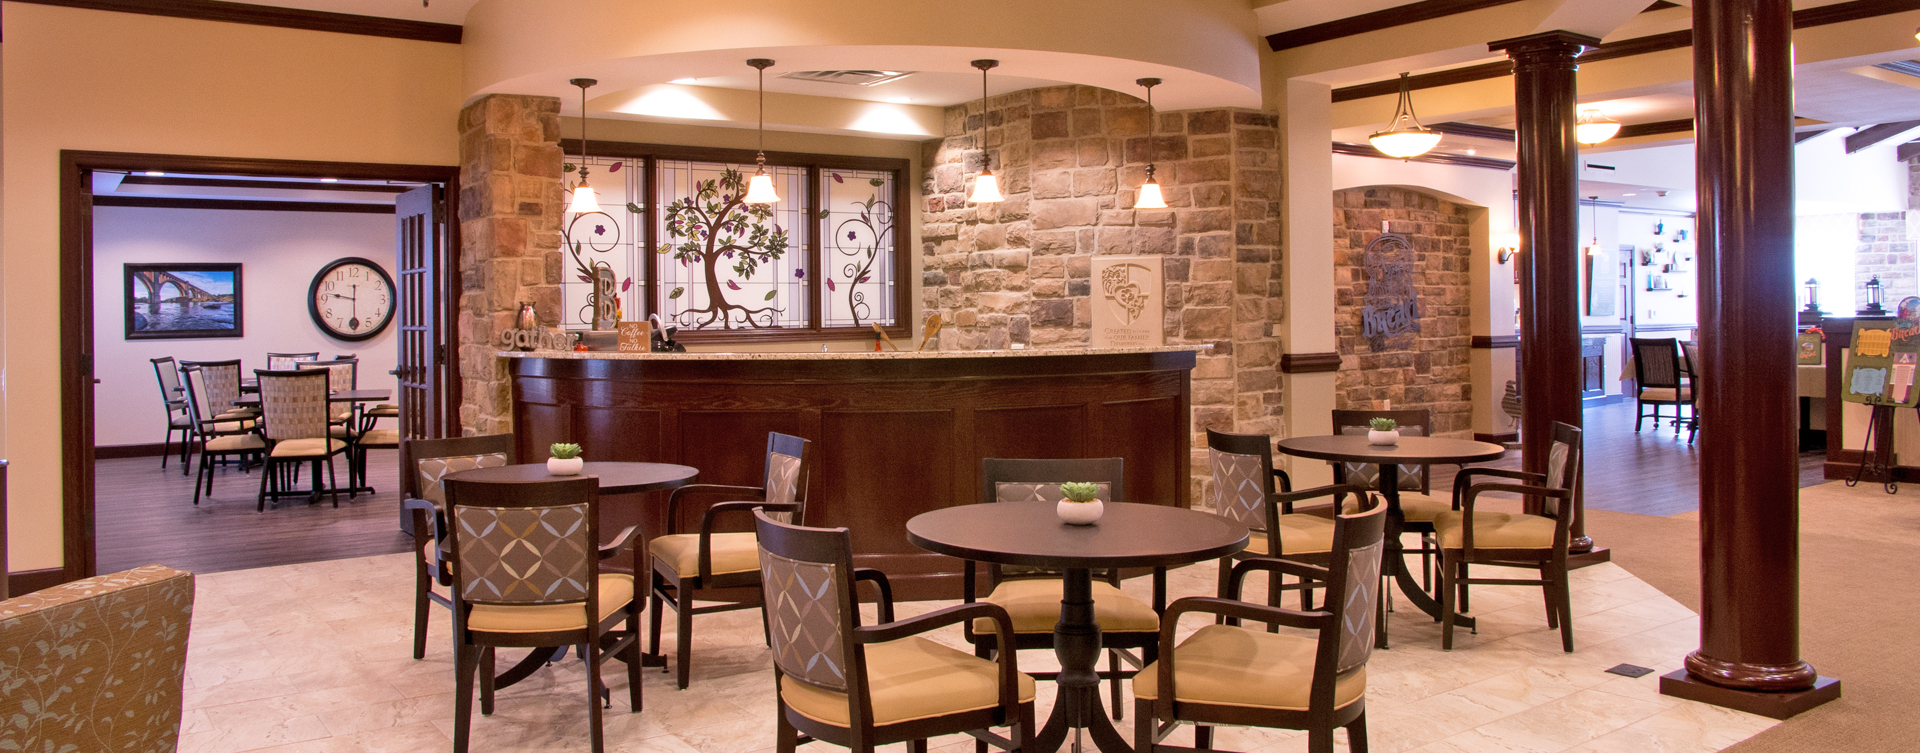 Mingle and converse with old and new friends alike in the bistro at Bickford of Chesterfield